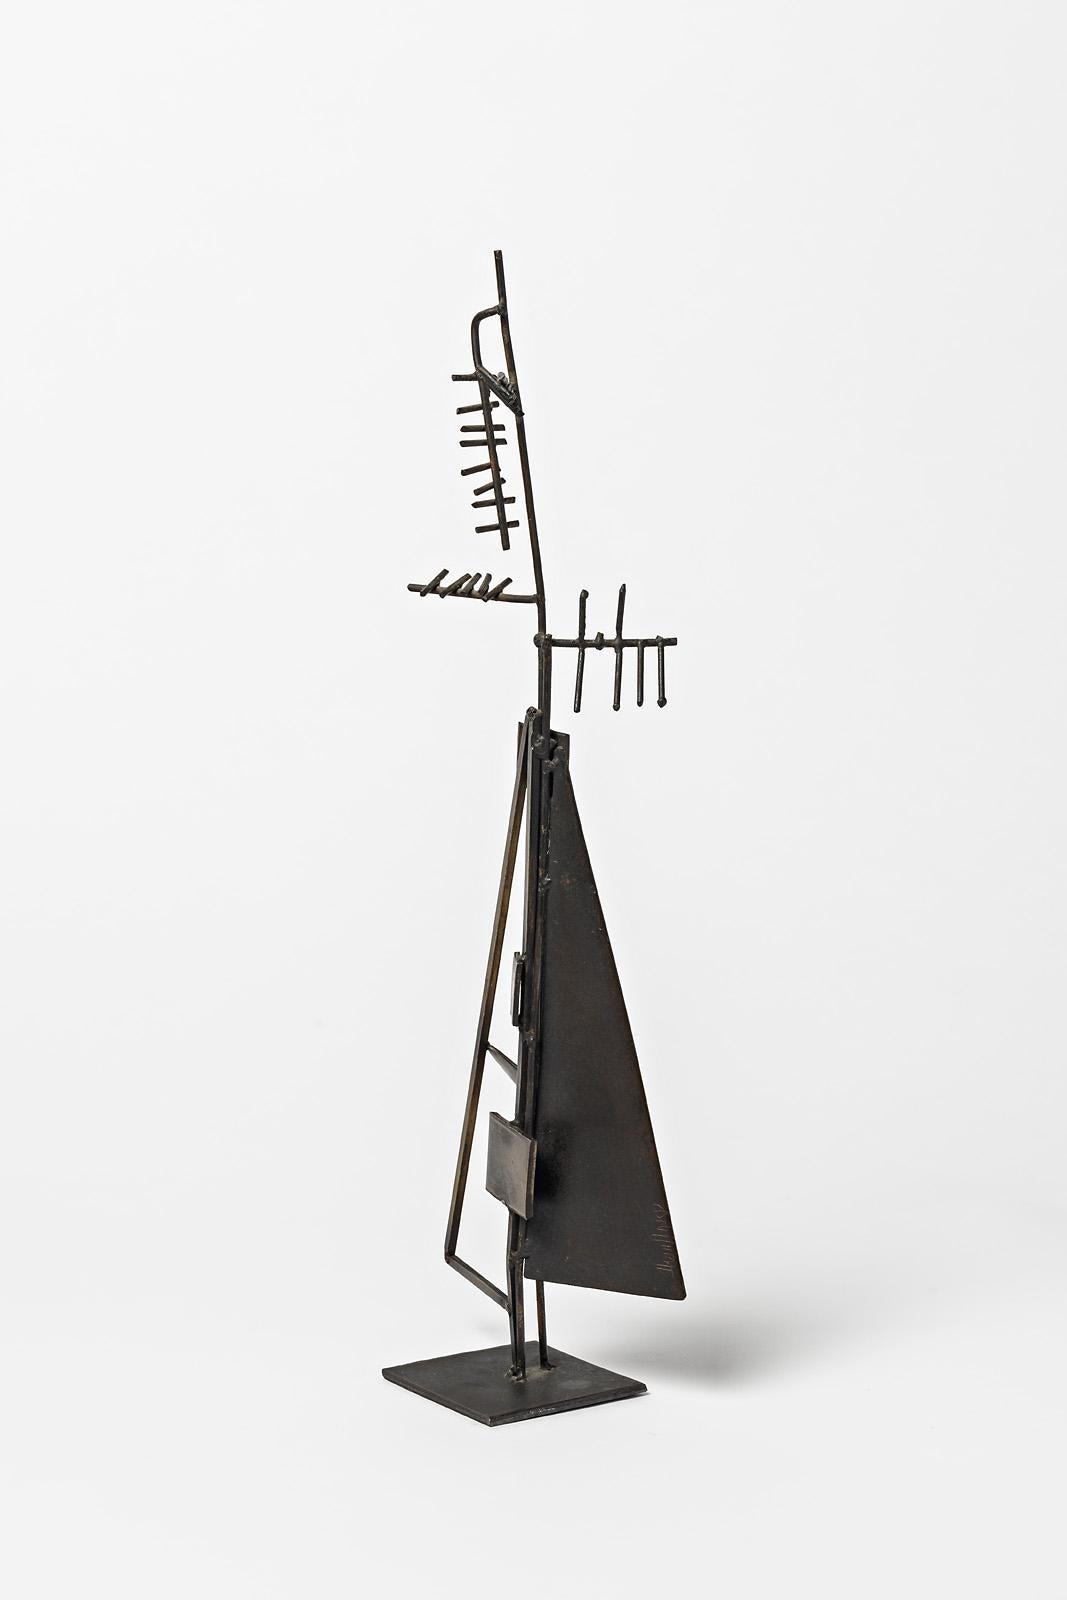 French Abstract Metal Midcentury Sculpture by Alain Douillard Black Metallic Form For Sale